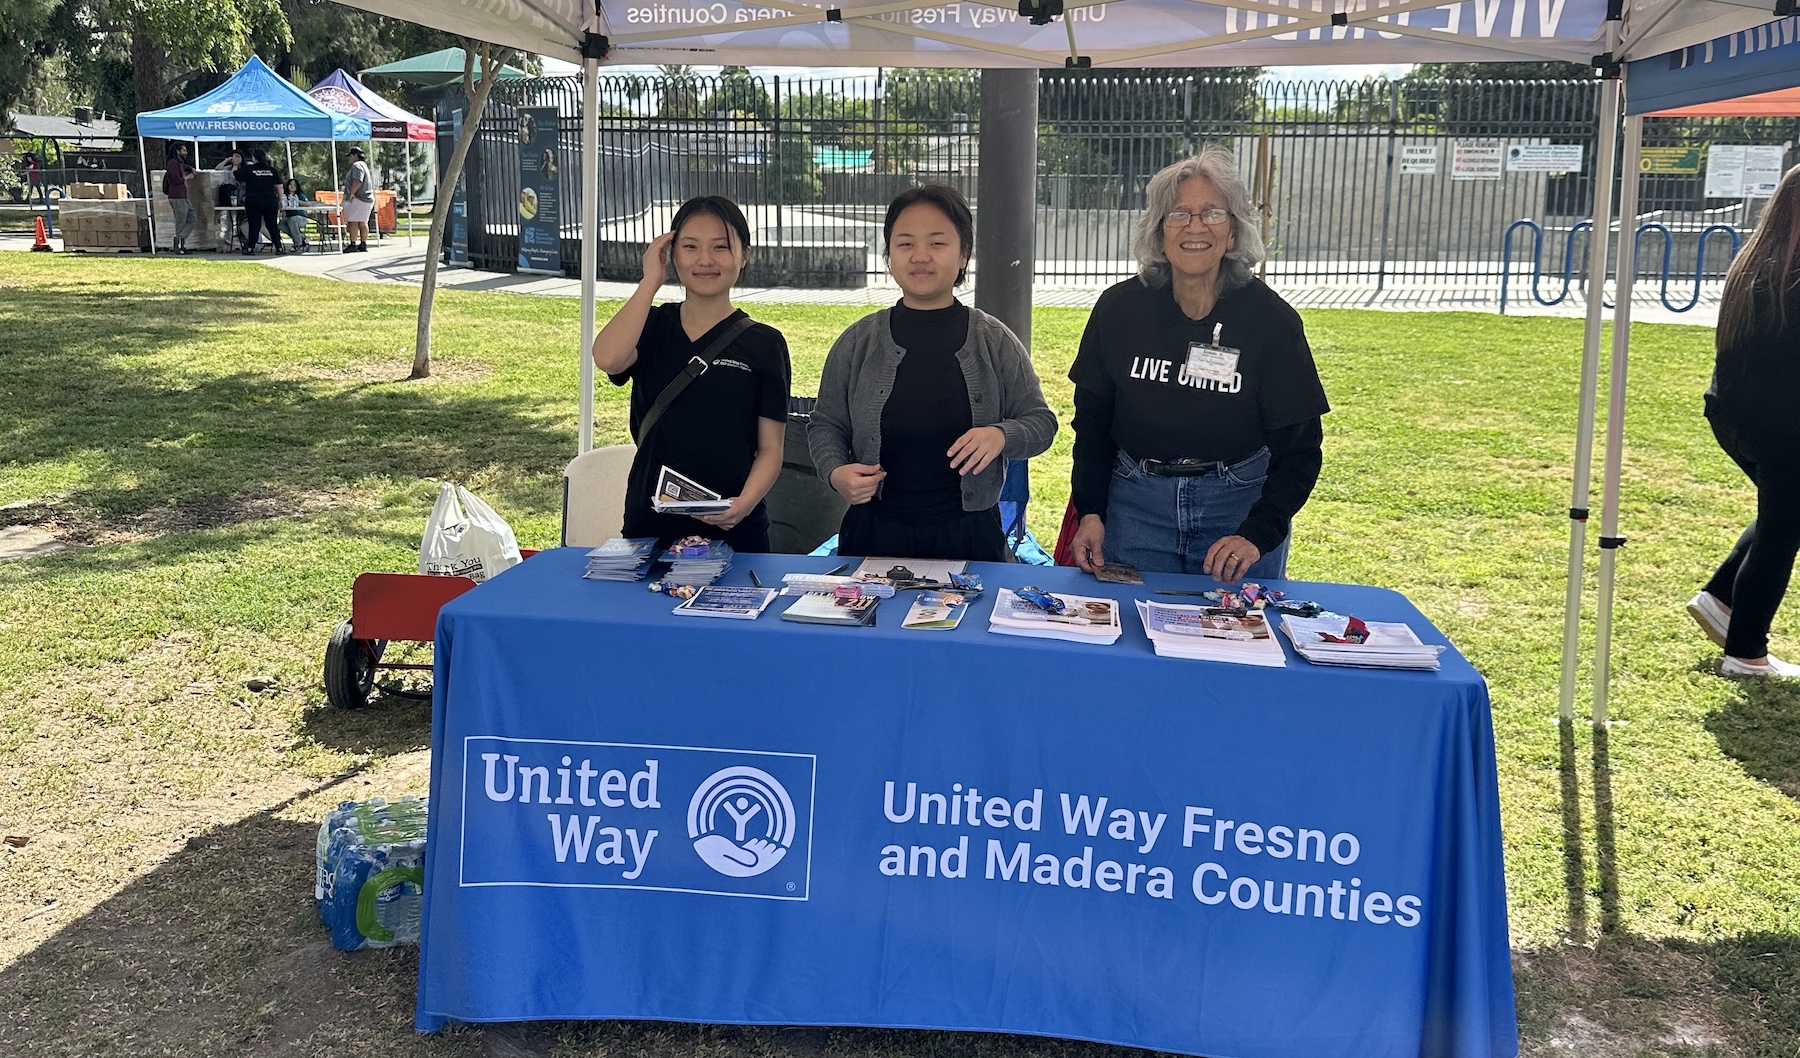 Three United Way team members staff a booth at an outreach event